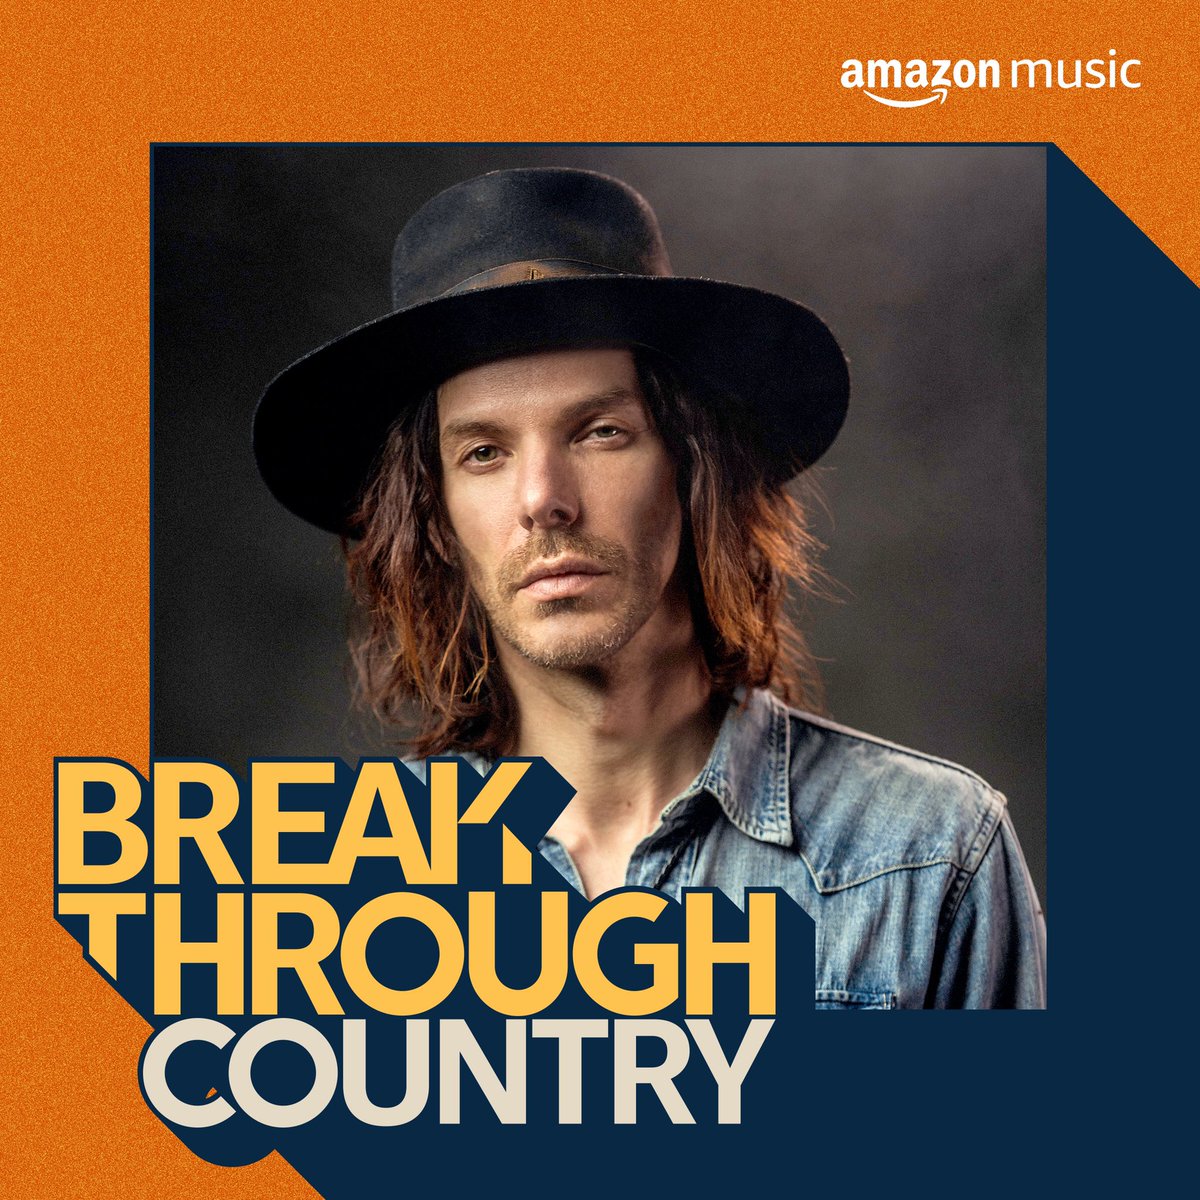 Thank you @amazonmusic for having @imkylemckearney as your cover artist for #BreakthroughCountry!! 🥳 check out his new single #ANNIE found.ee/KM-annie